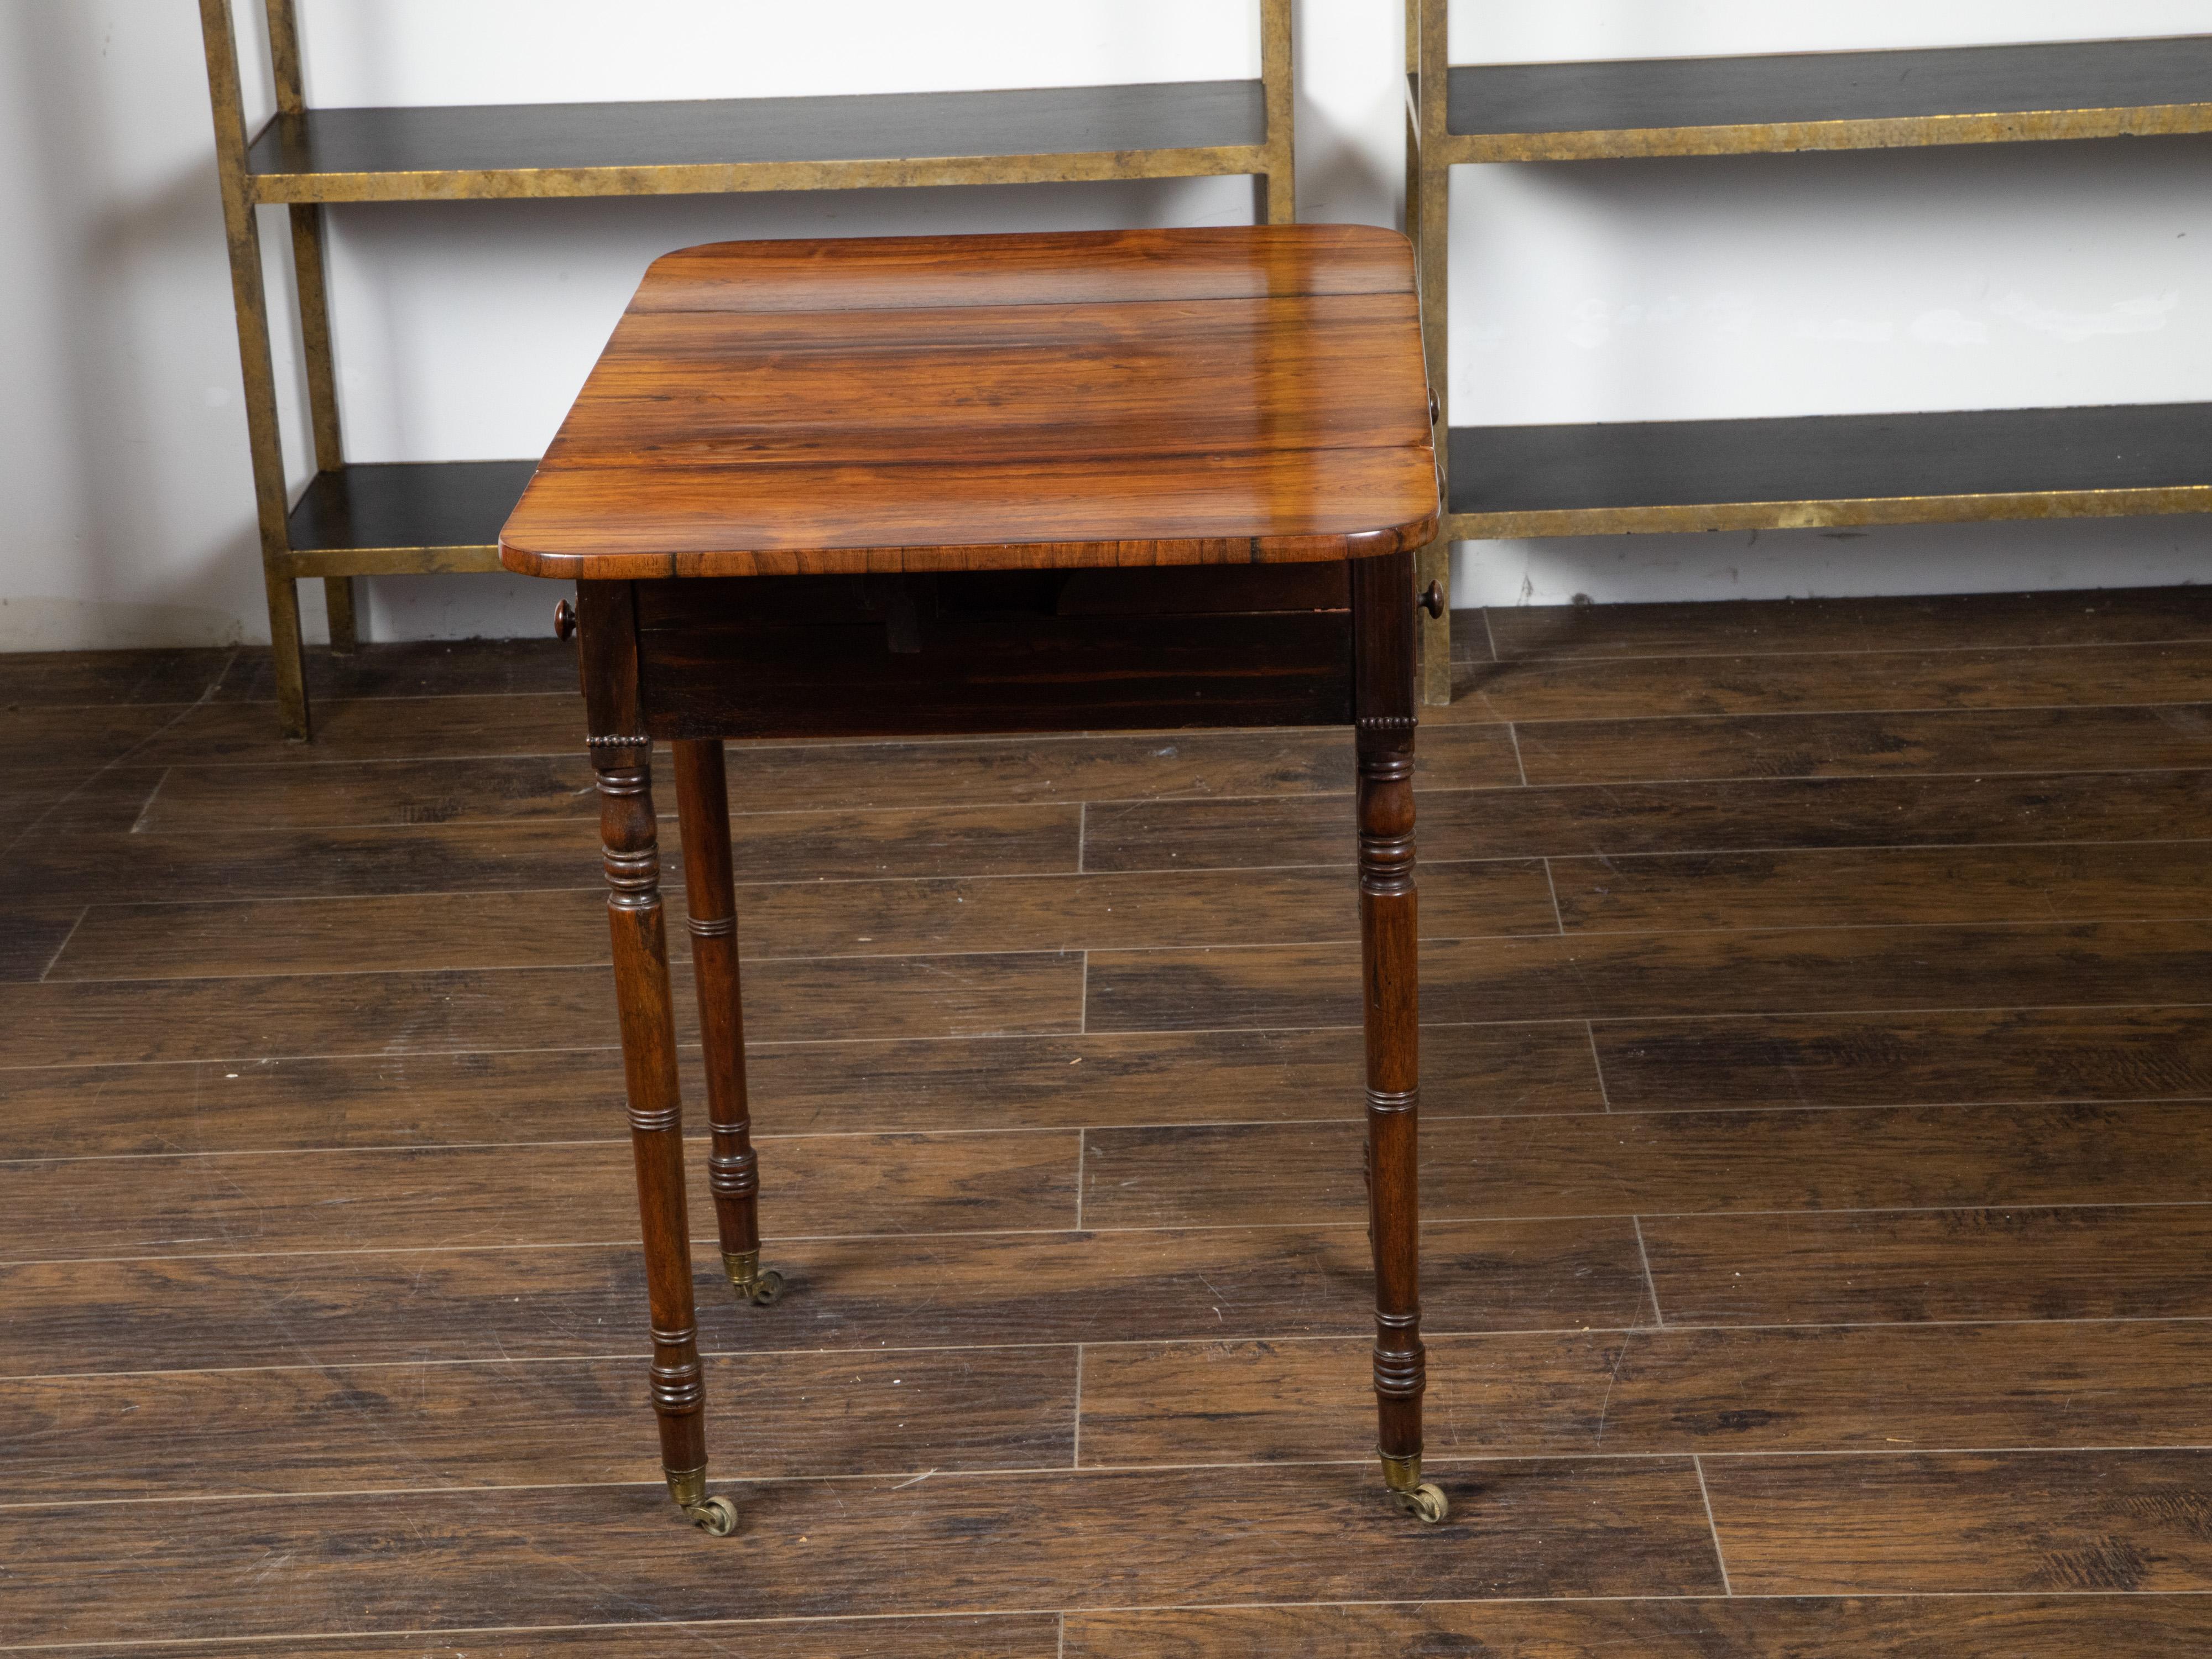 English Regency 1820s Mahogany Pembroke Table with Drop Leaves and Drawers For Sale 1